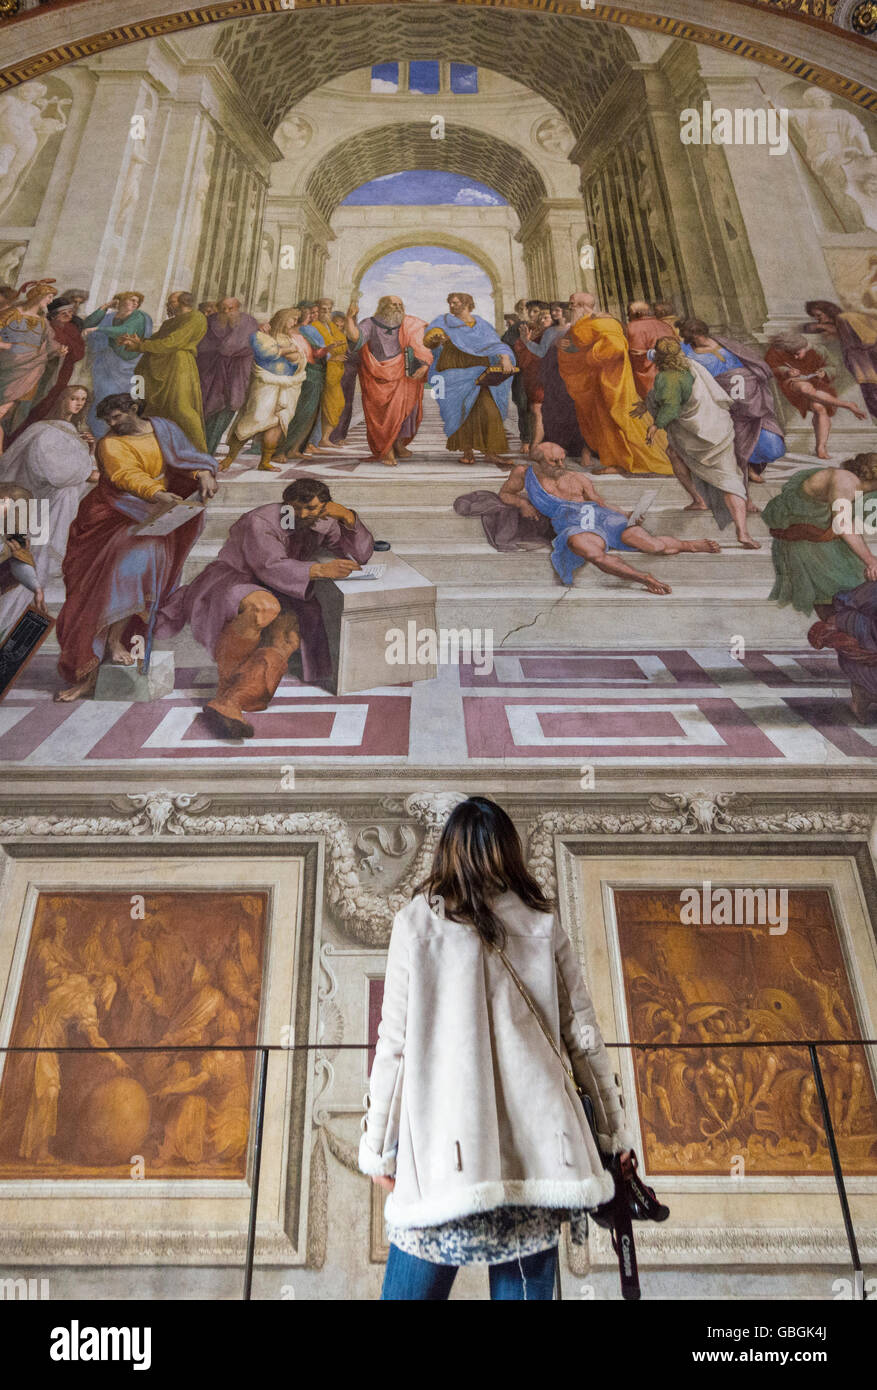 Rome. Italy. Visitor admiring the 'School of Athens' in the Raphael Rooms, Stanza della Segnatura, Vatican Museums. Stock Photo